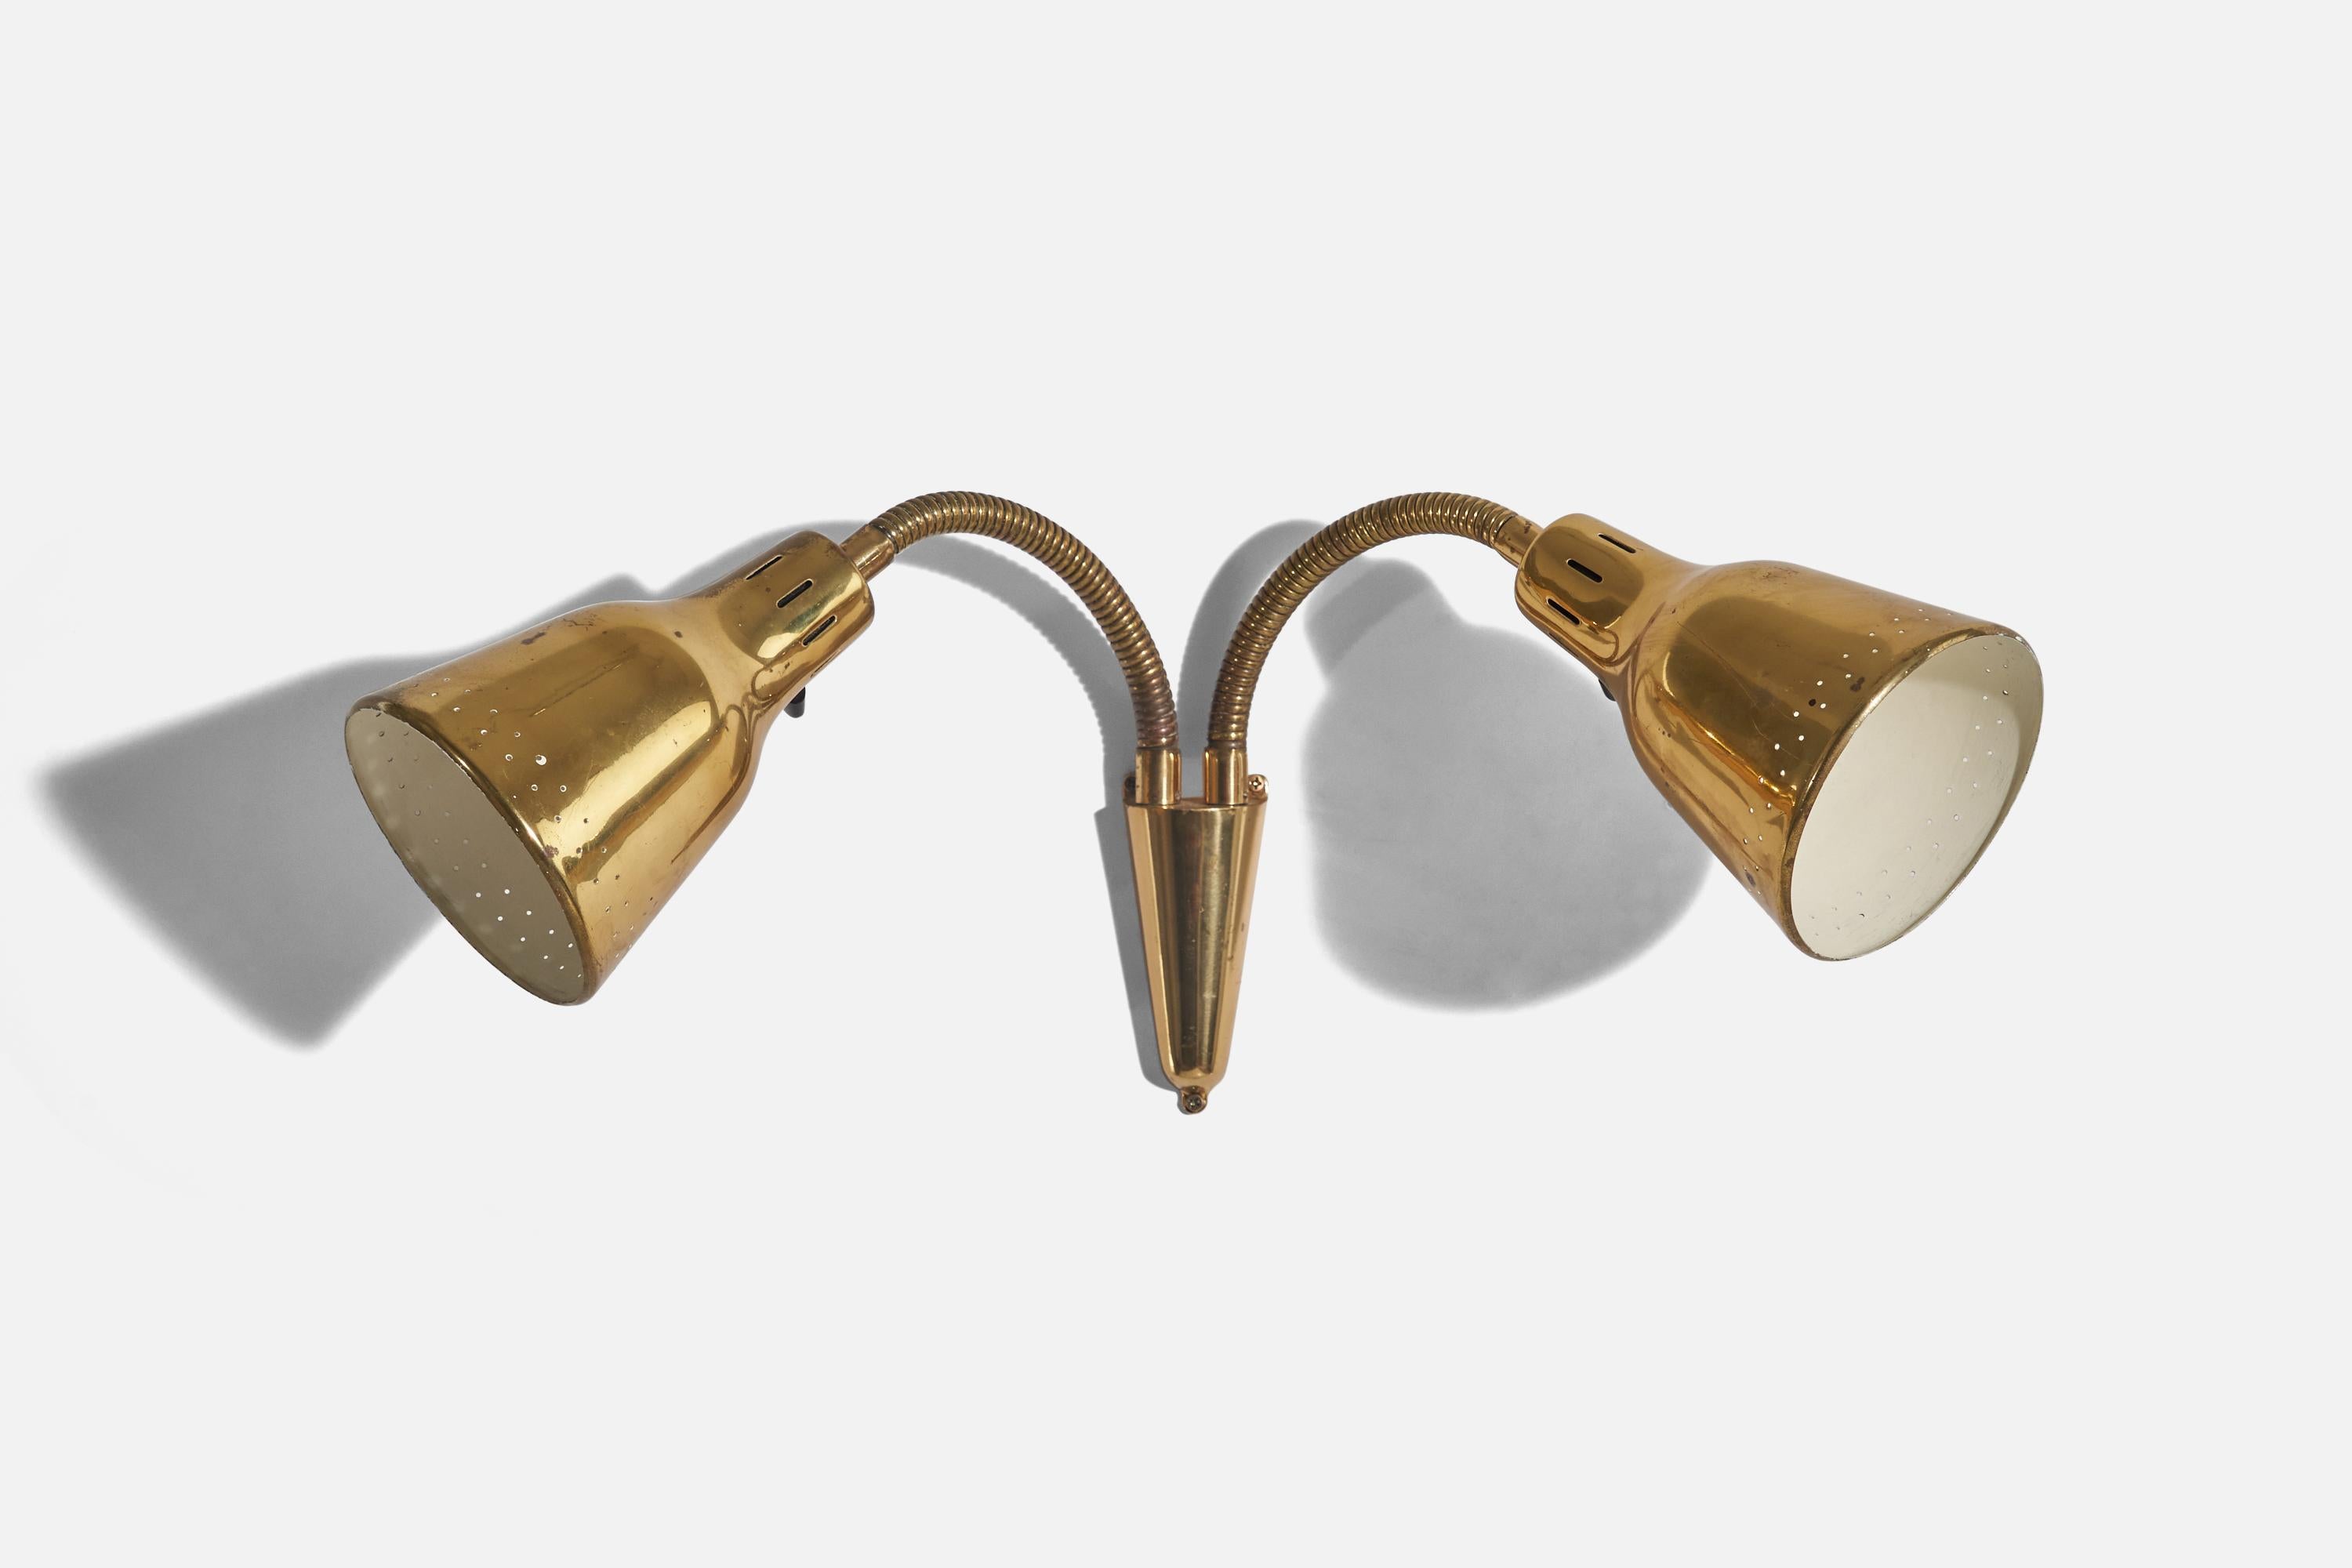 A brass sconce / wall light designed and production attributed to Bröderna Malmströms Metallvarufabrik, Malmö, Sweden, 1940s.

Variable dimensions, measured as illustrated in the first image.

Socket takes standard E-26 medium base